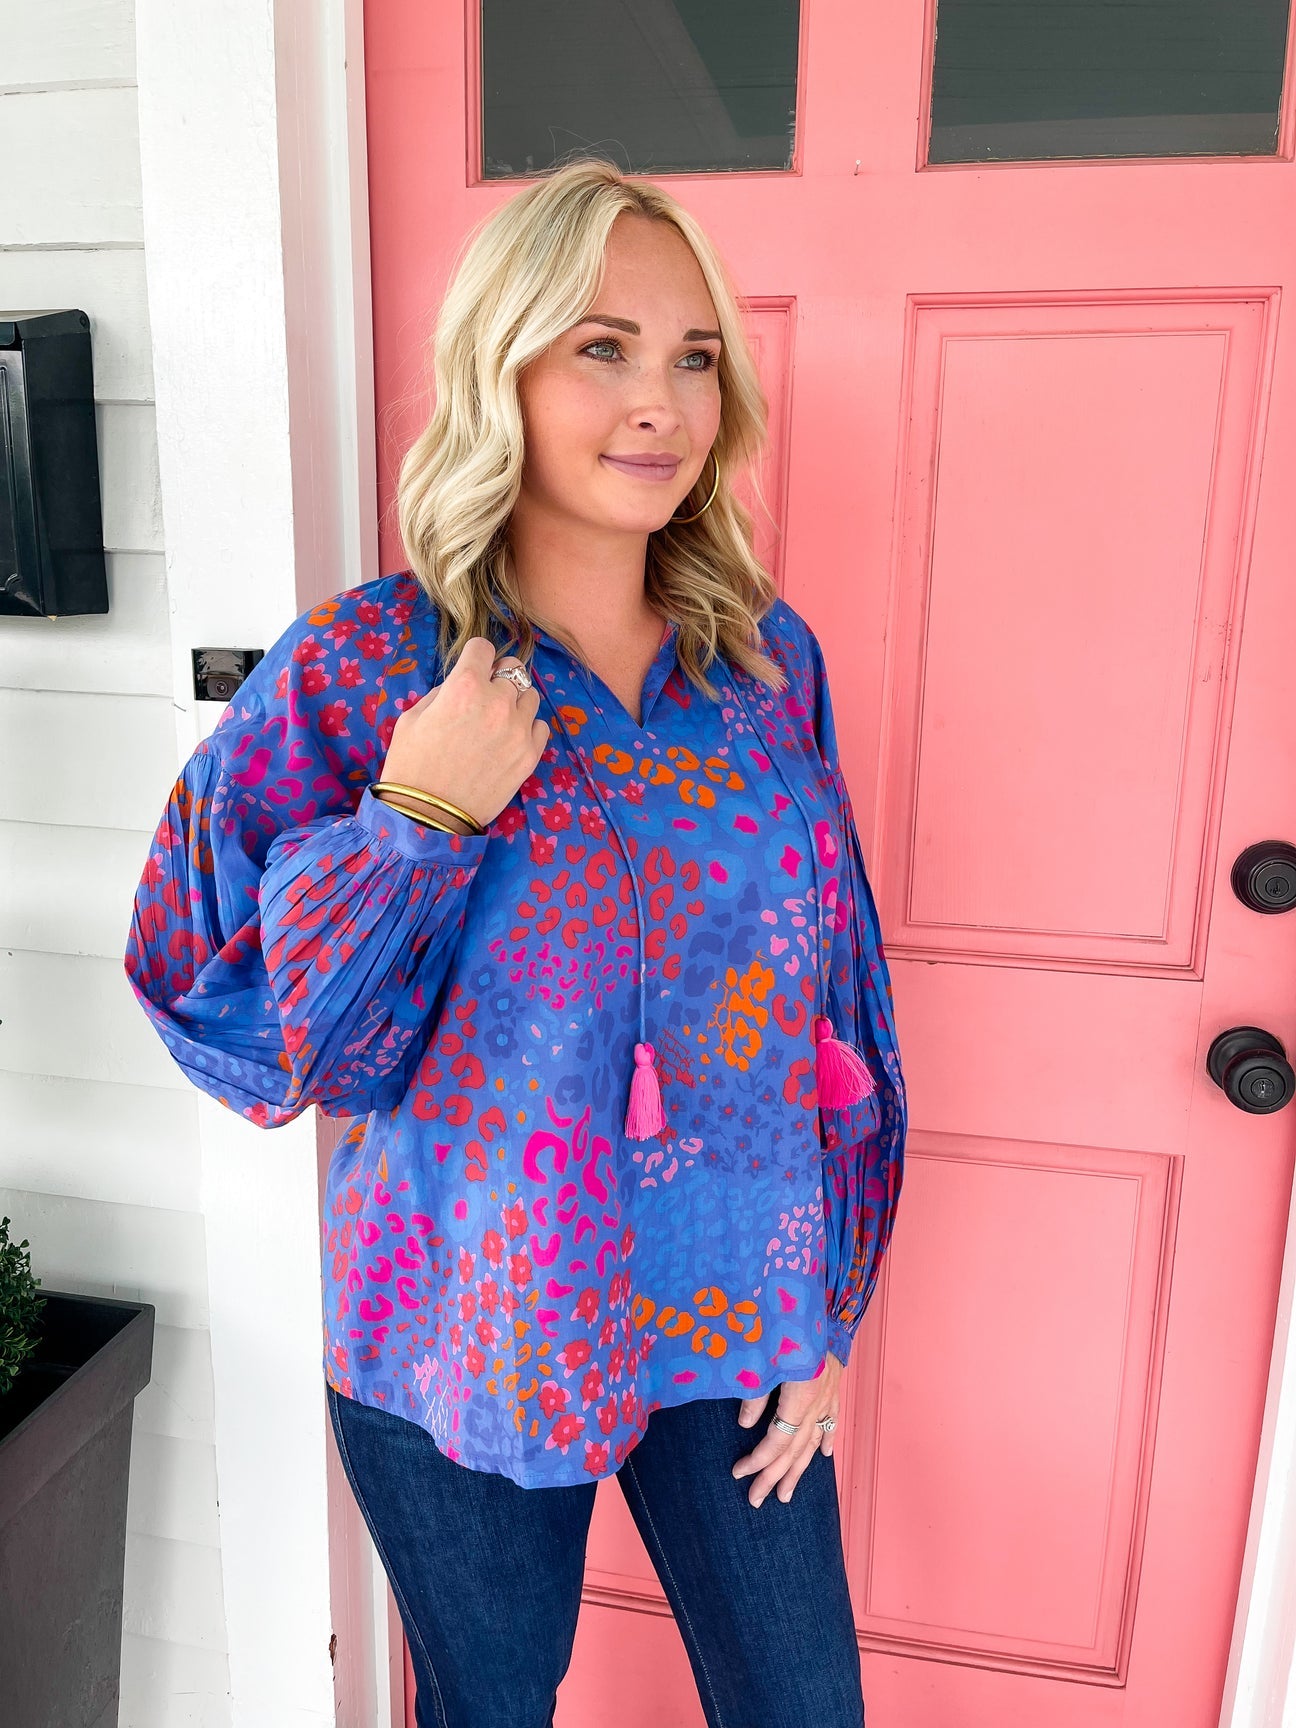 JOVIE FLOUNCE TOP (is this correct?) - Molly's! A Chic and Unique Boutique 